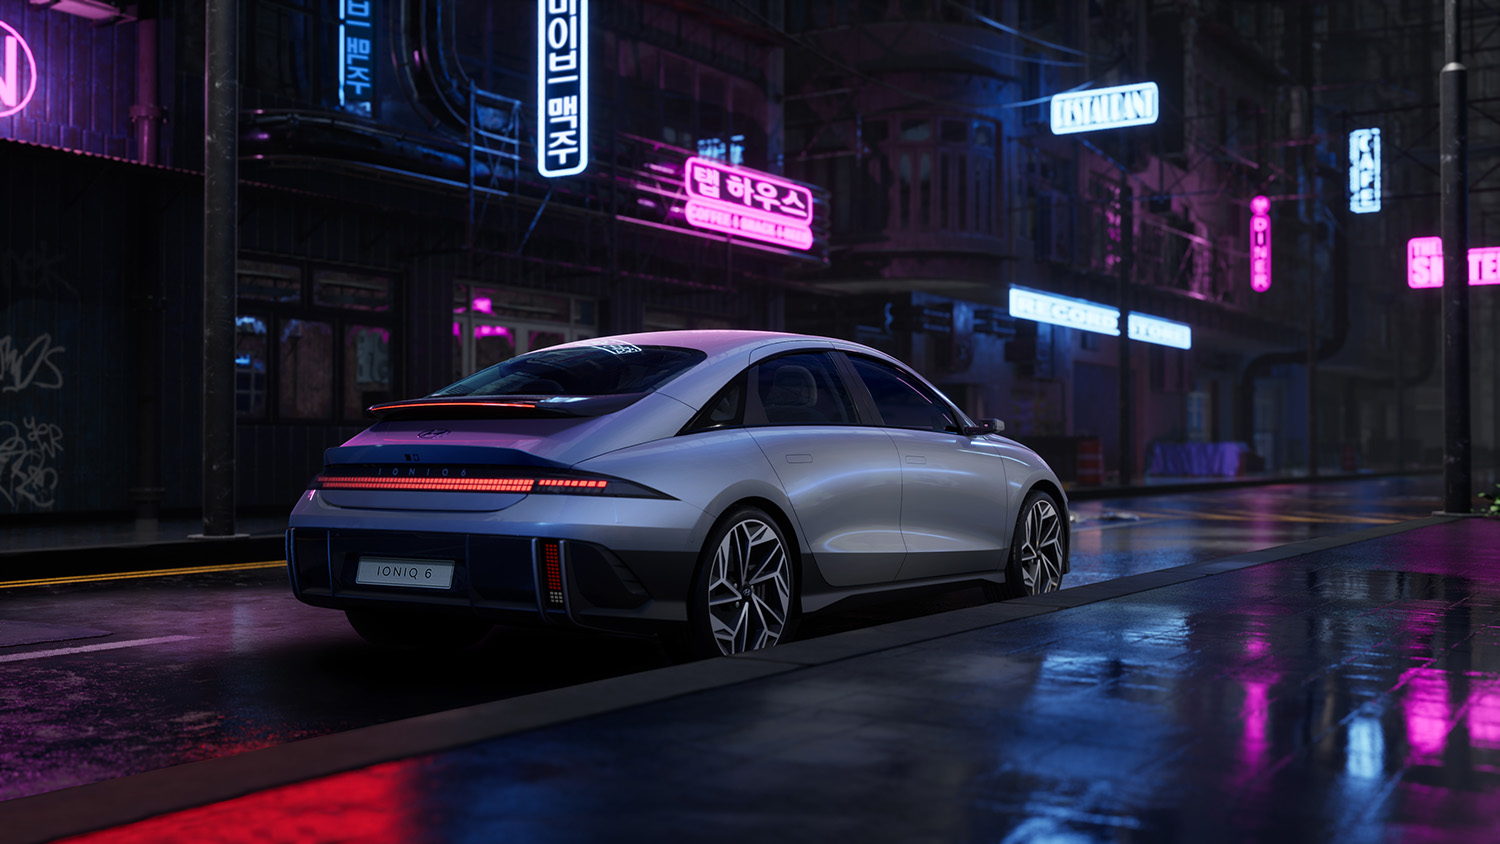 rear view of the all-new Hyundai Ioniq 6 EV parked on city street